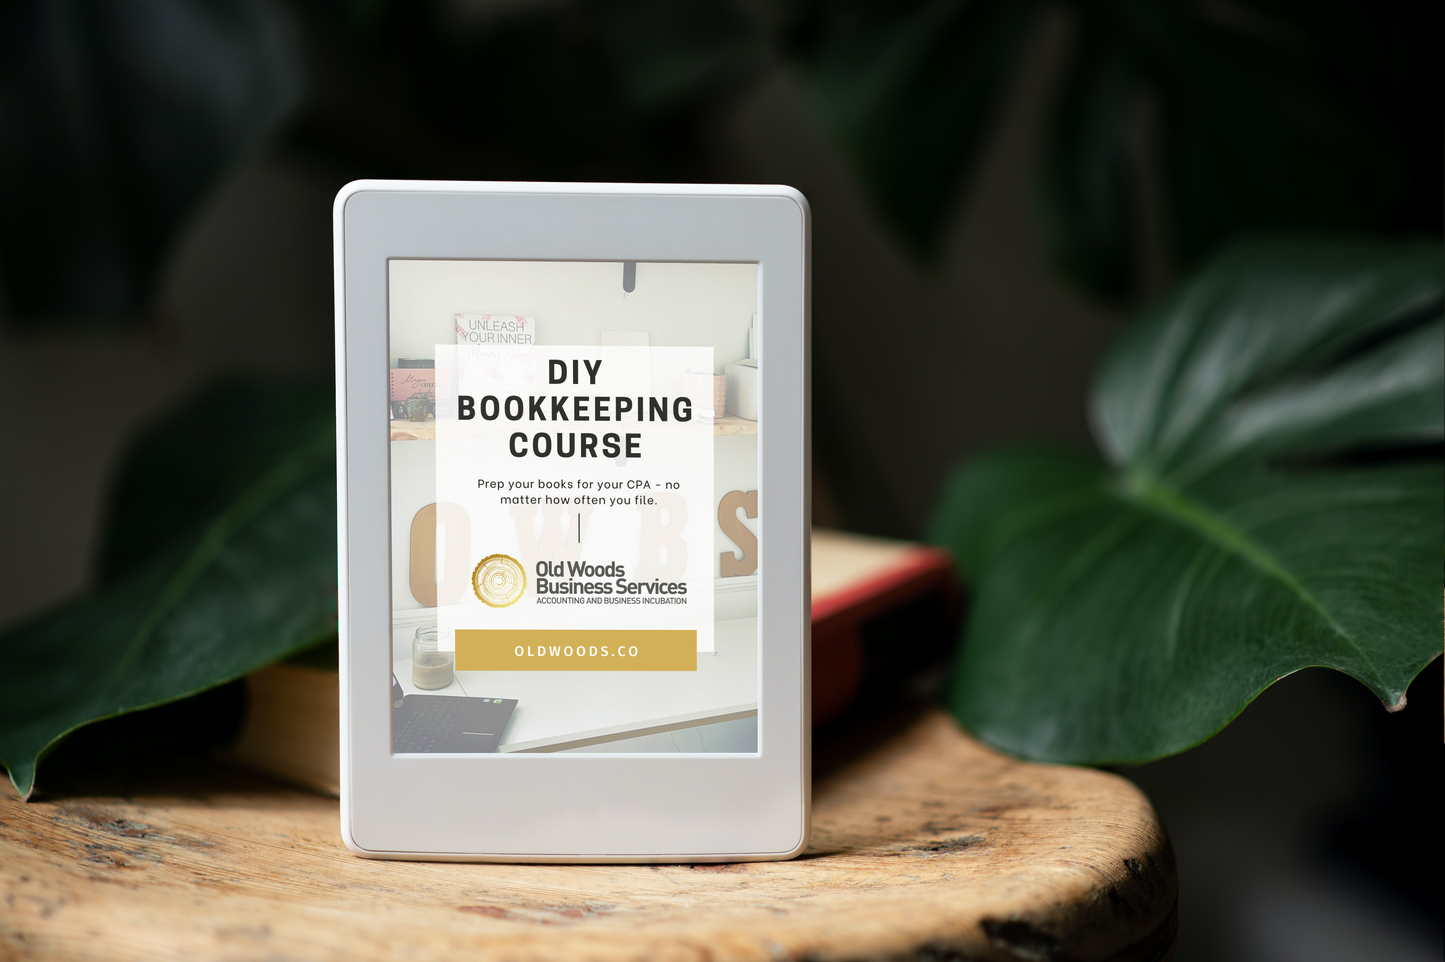 DIY Bookkeeping Course